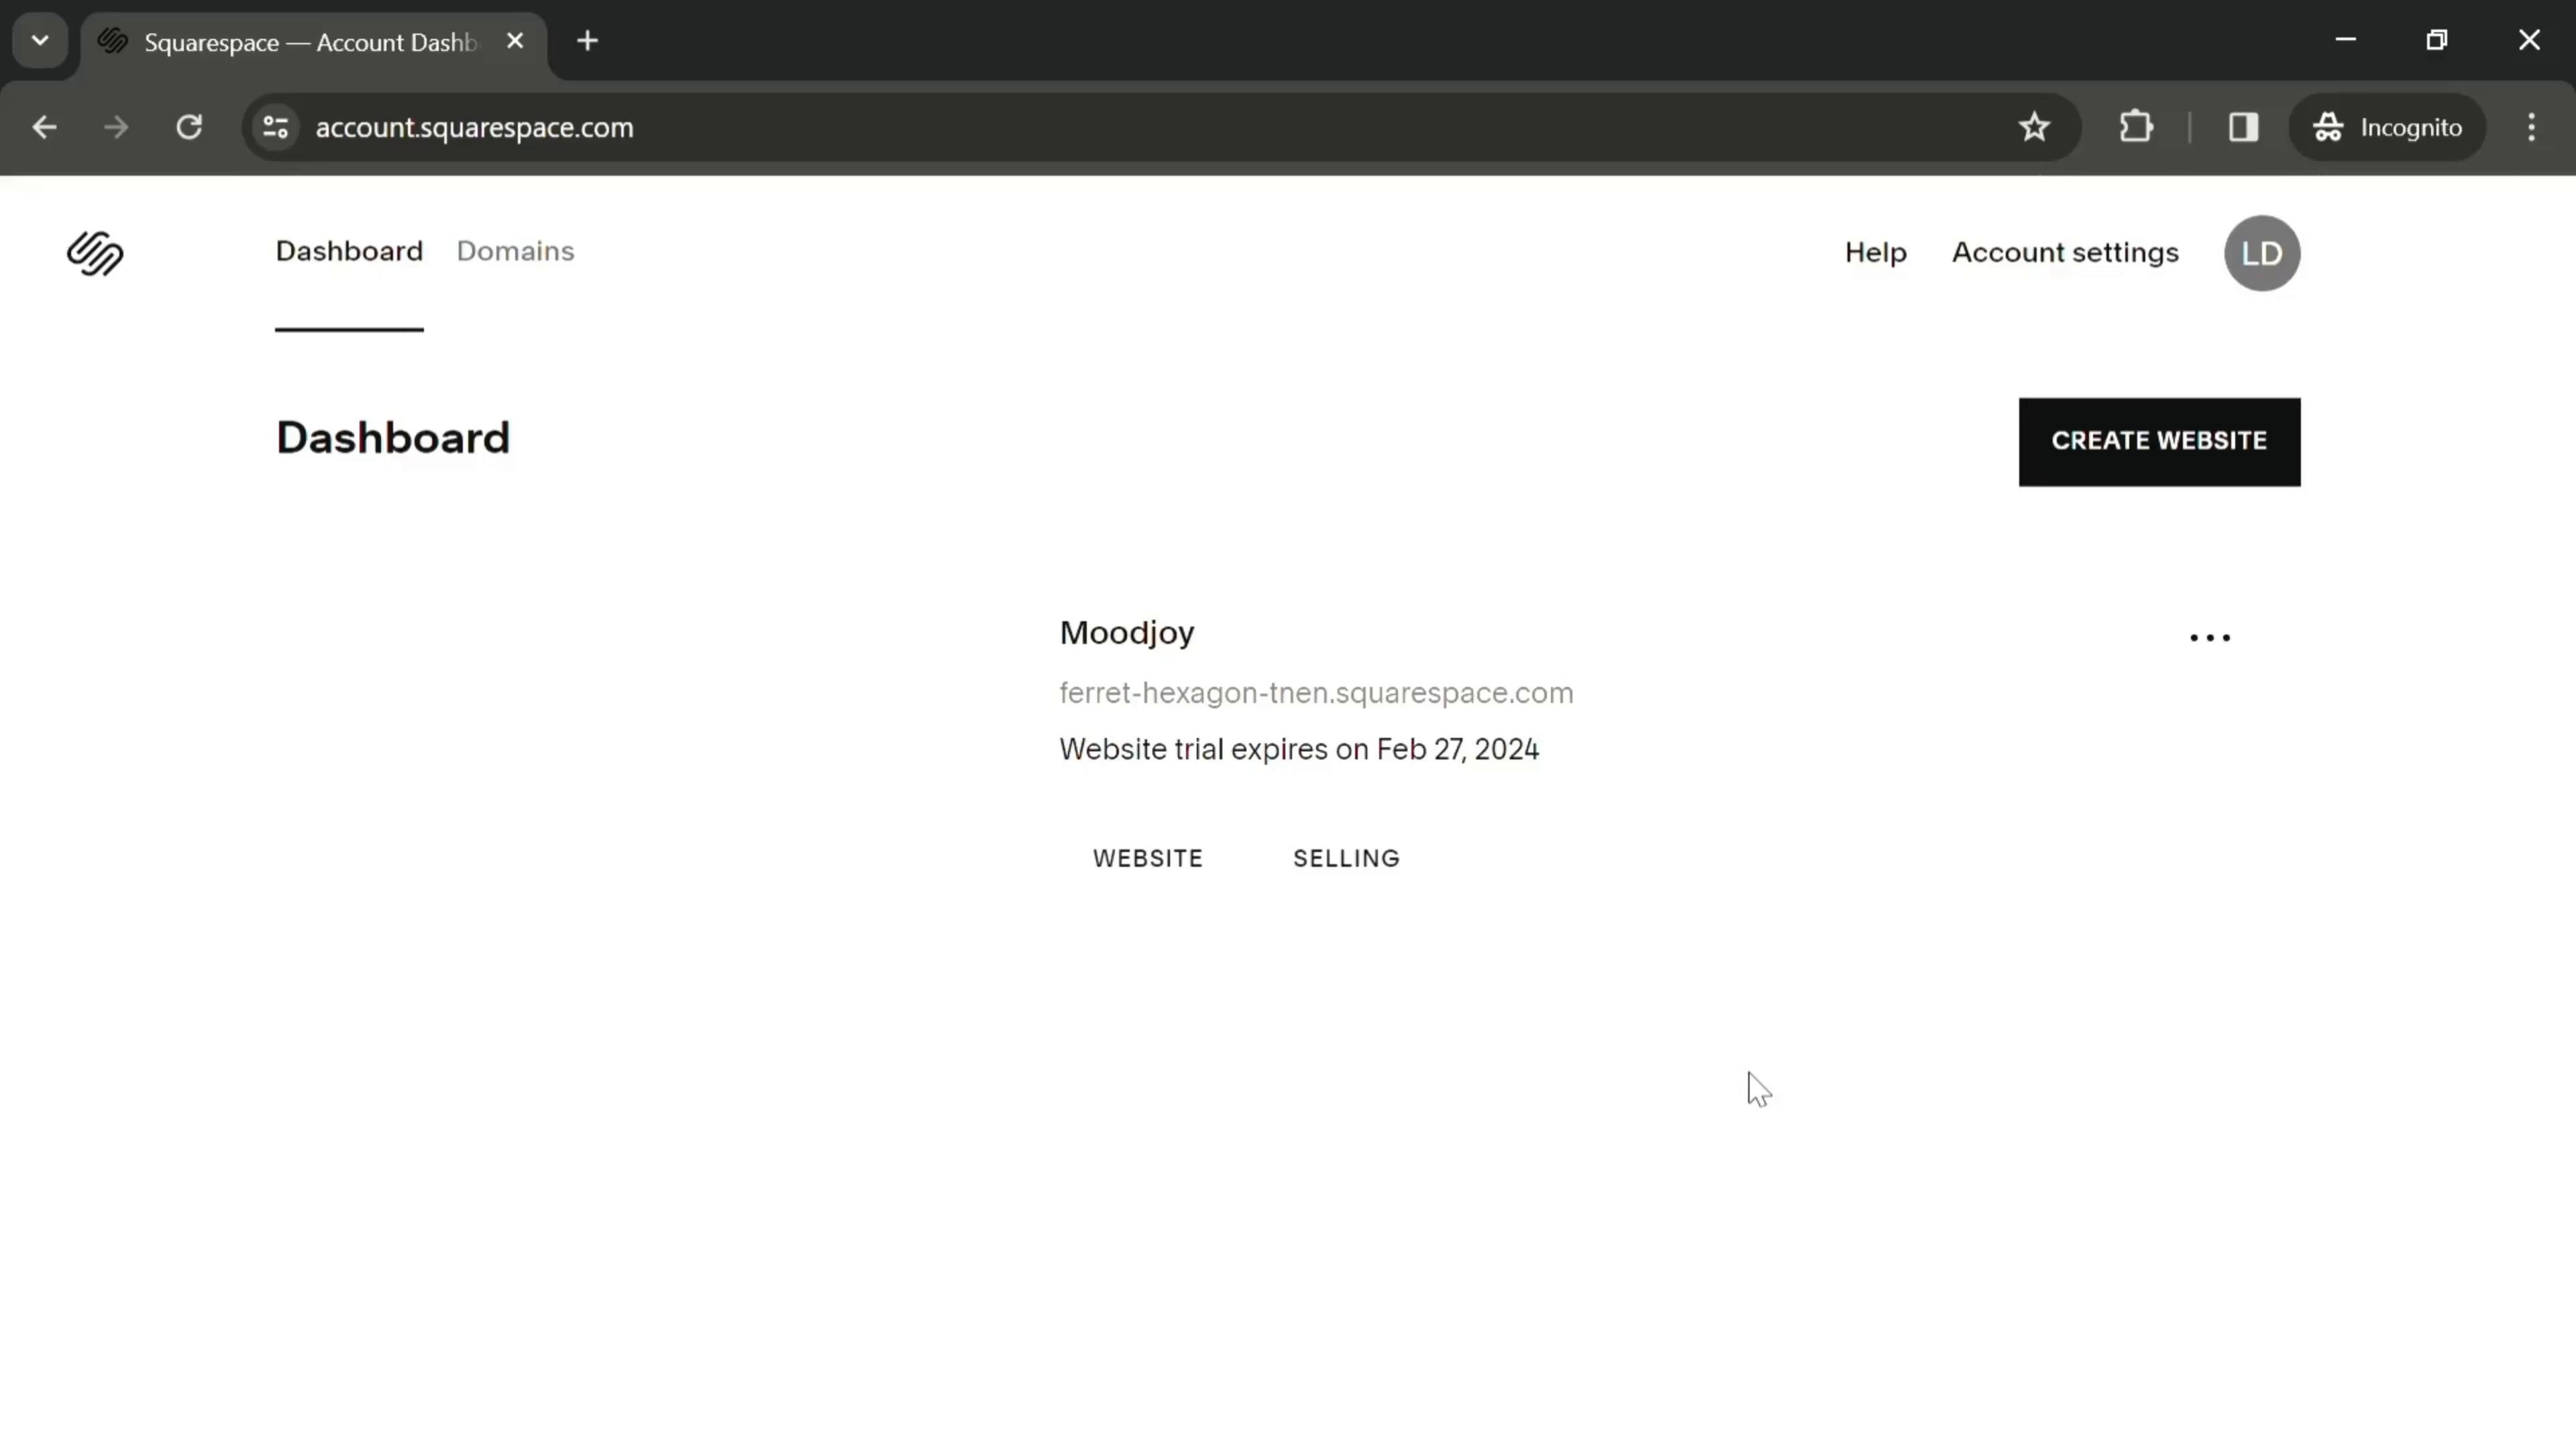 Screenshot of Creating a website on Squarespace